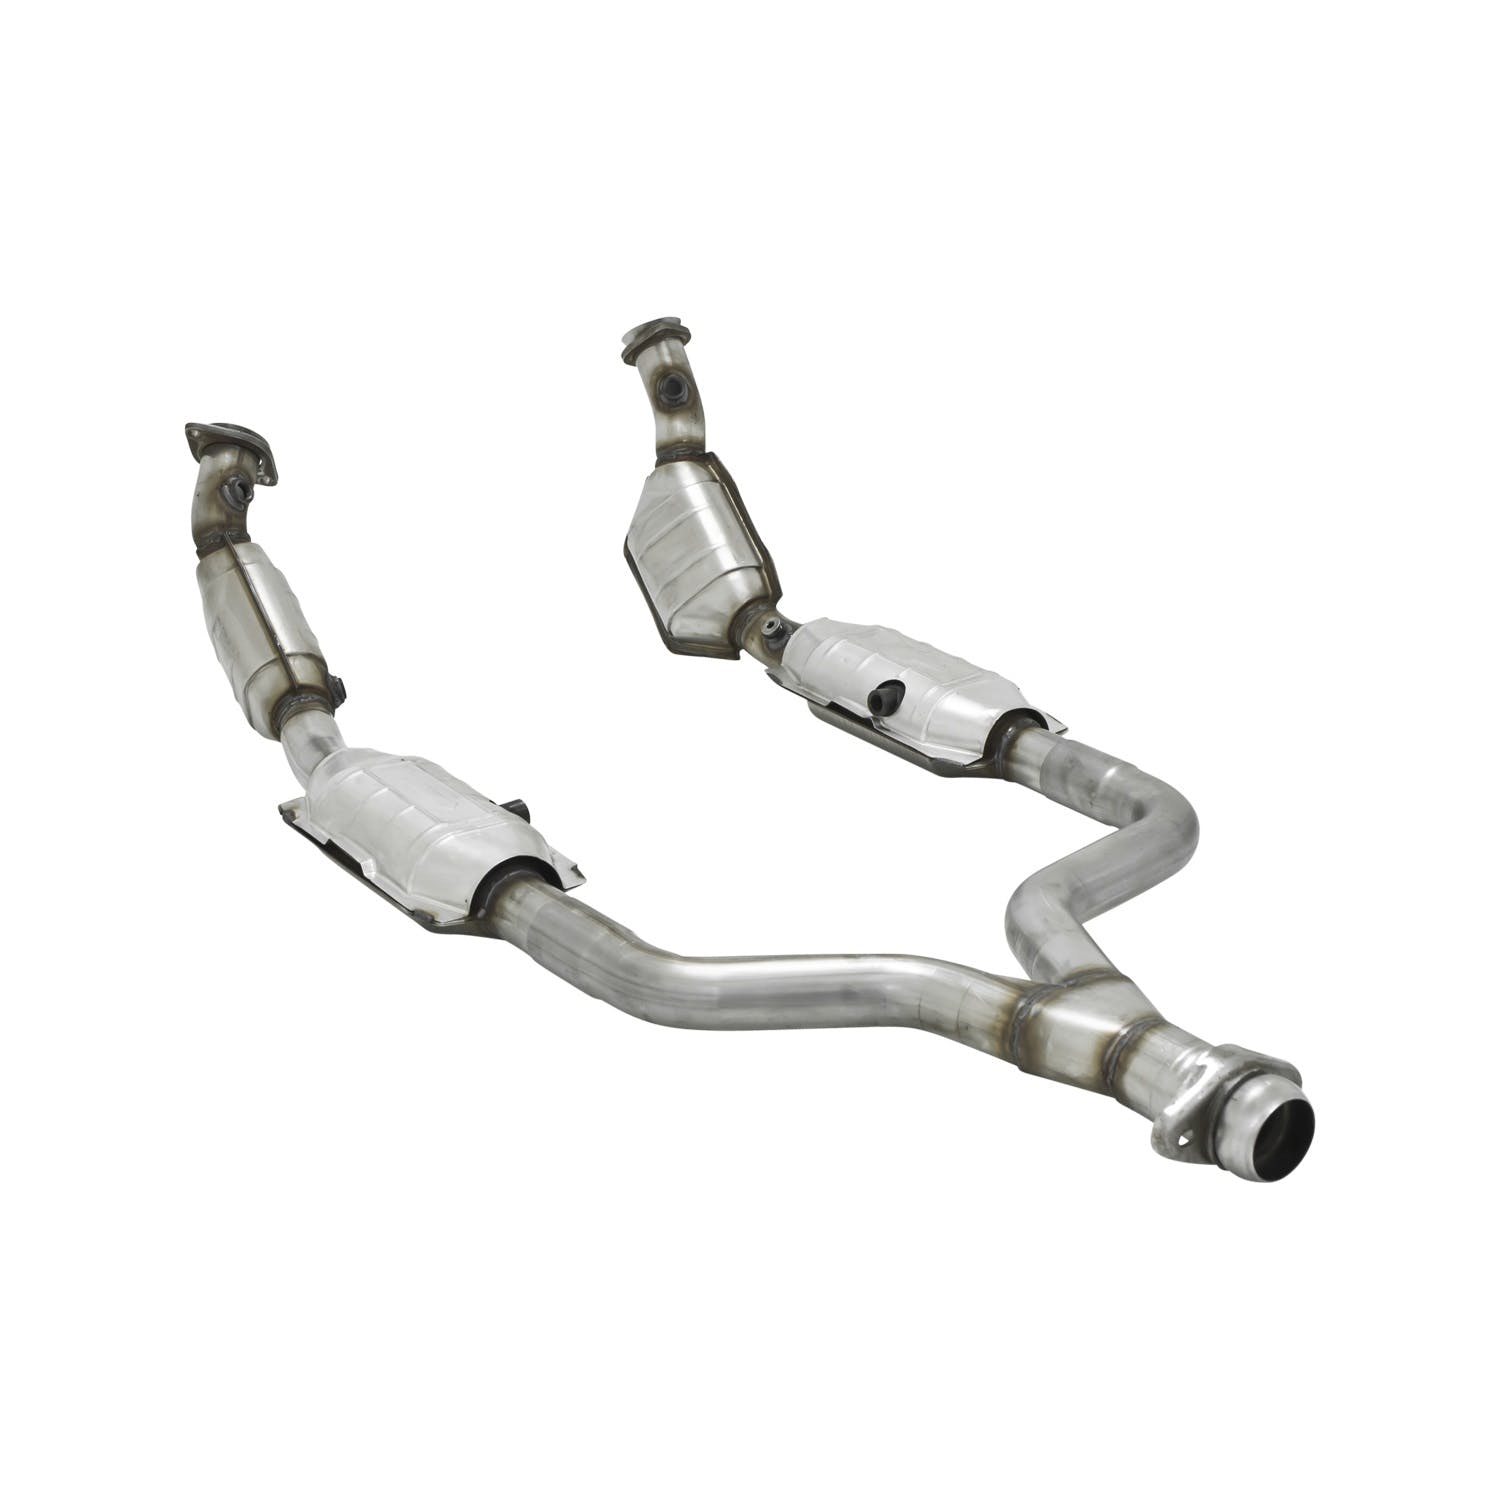 Flowmaster Catalytic Converters 2020023 Catalytic Converter-Direct Fit-2.25 in. Inlet/Outlet-49 State